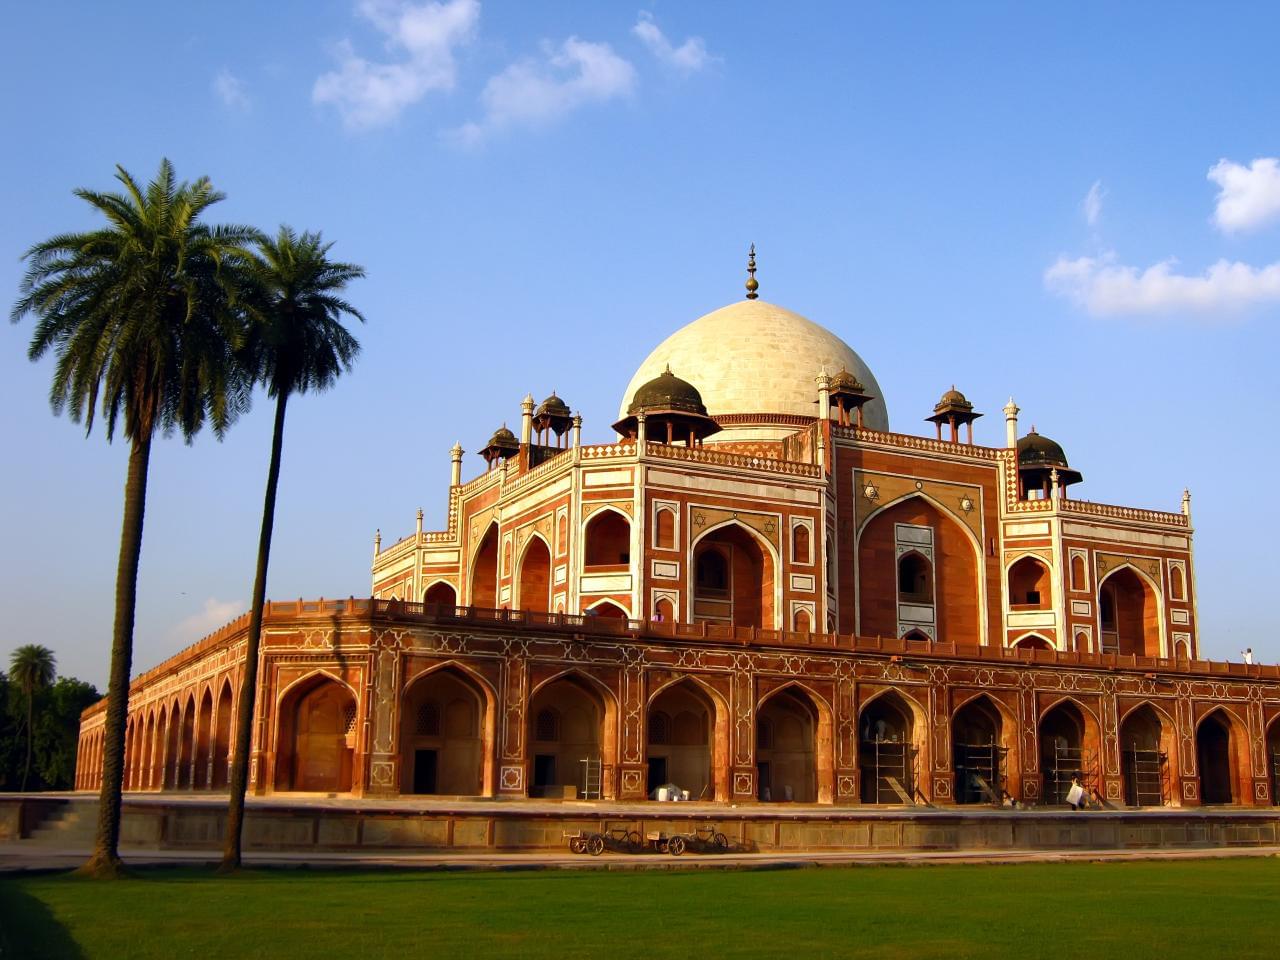 Humayun’s Tomb Overview